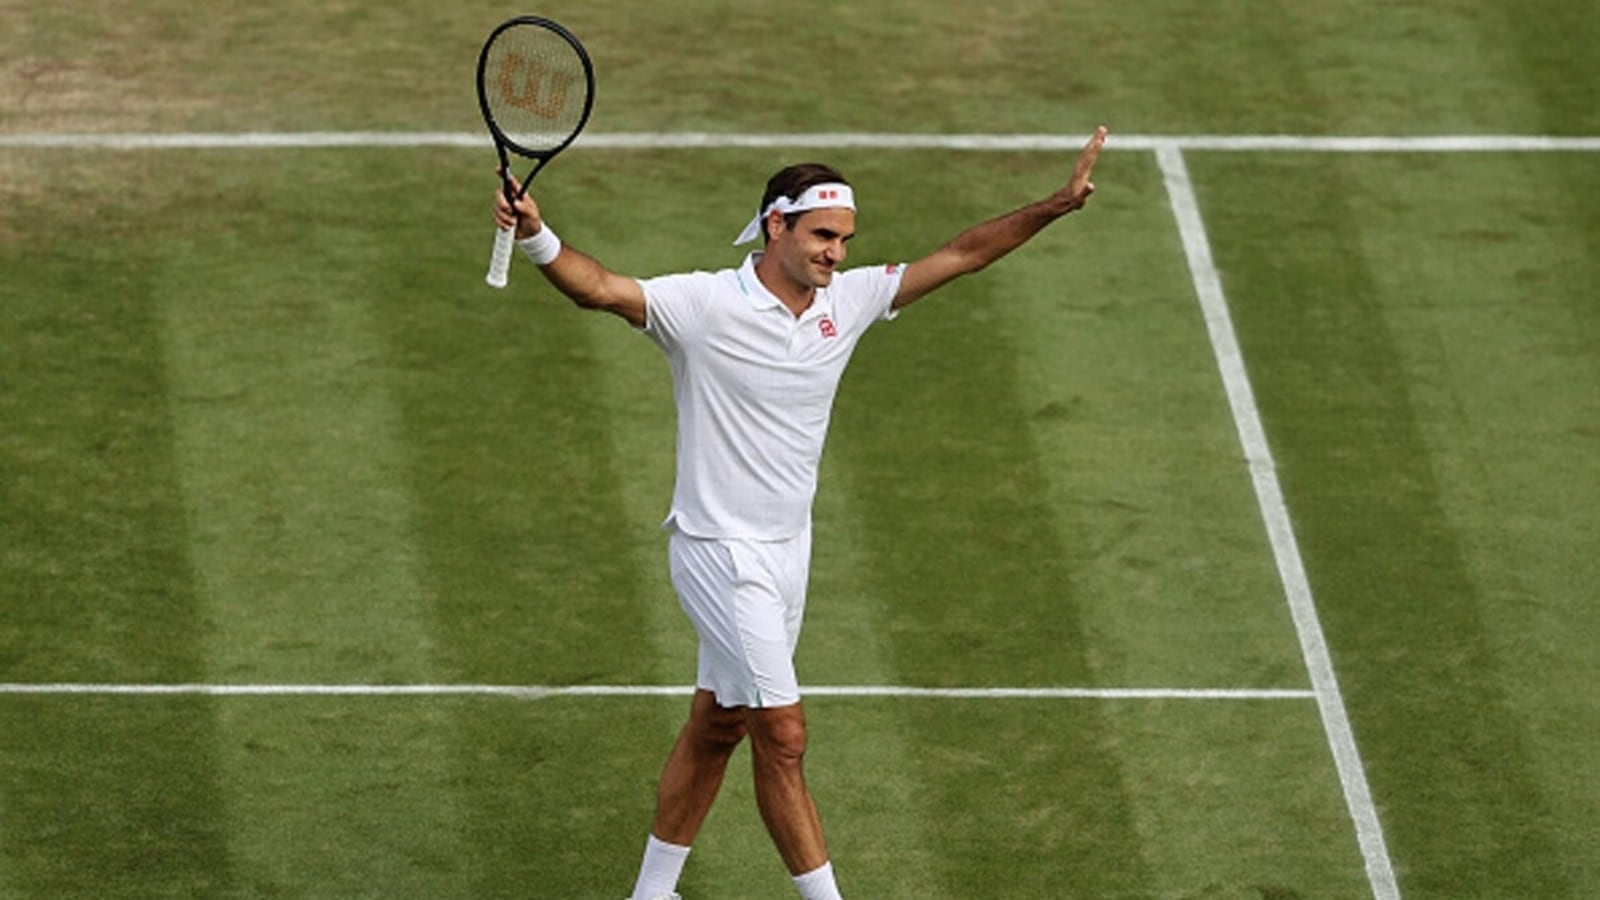 Roger Federer announces retirement, Laver Cup 2022 to be tennis great's